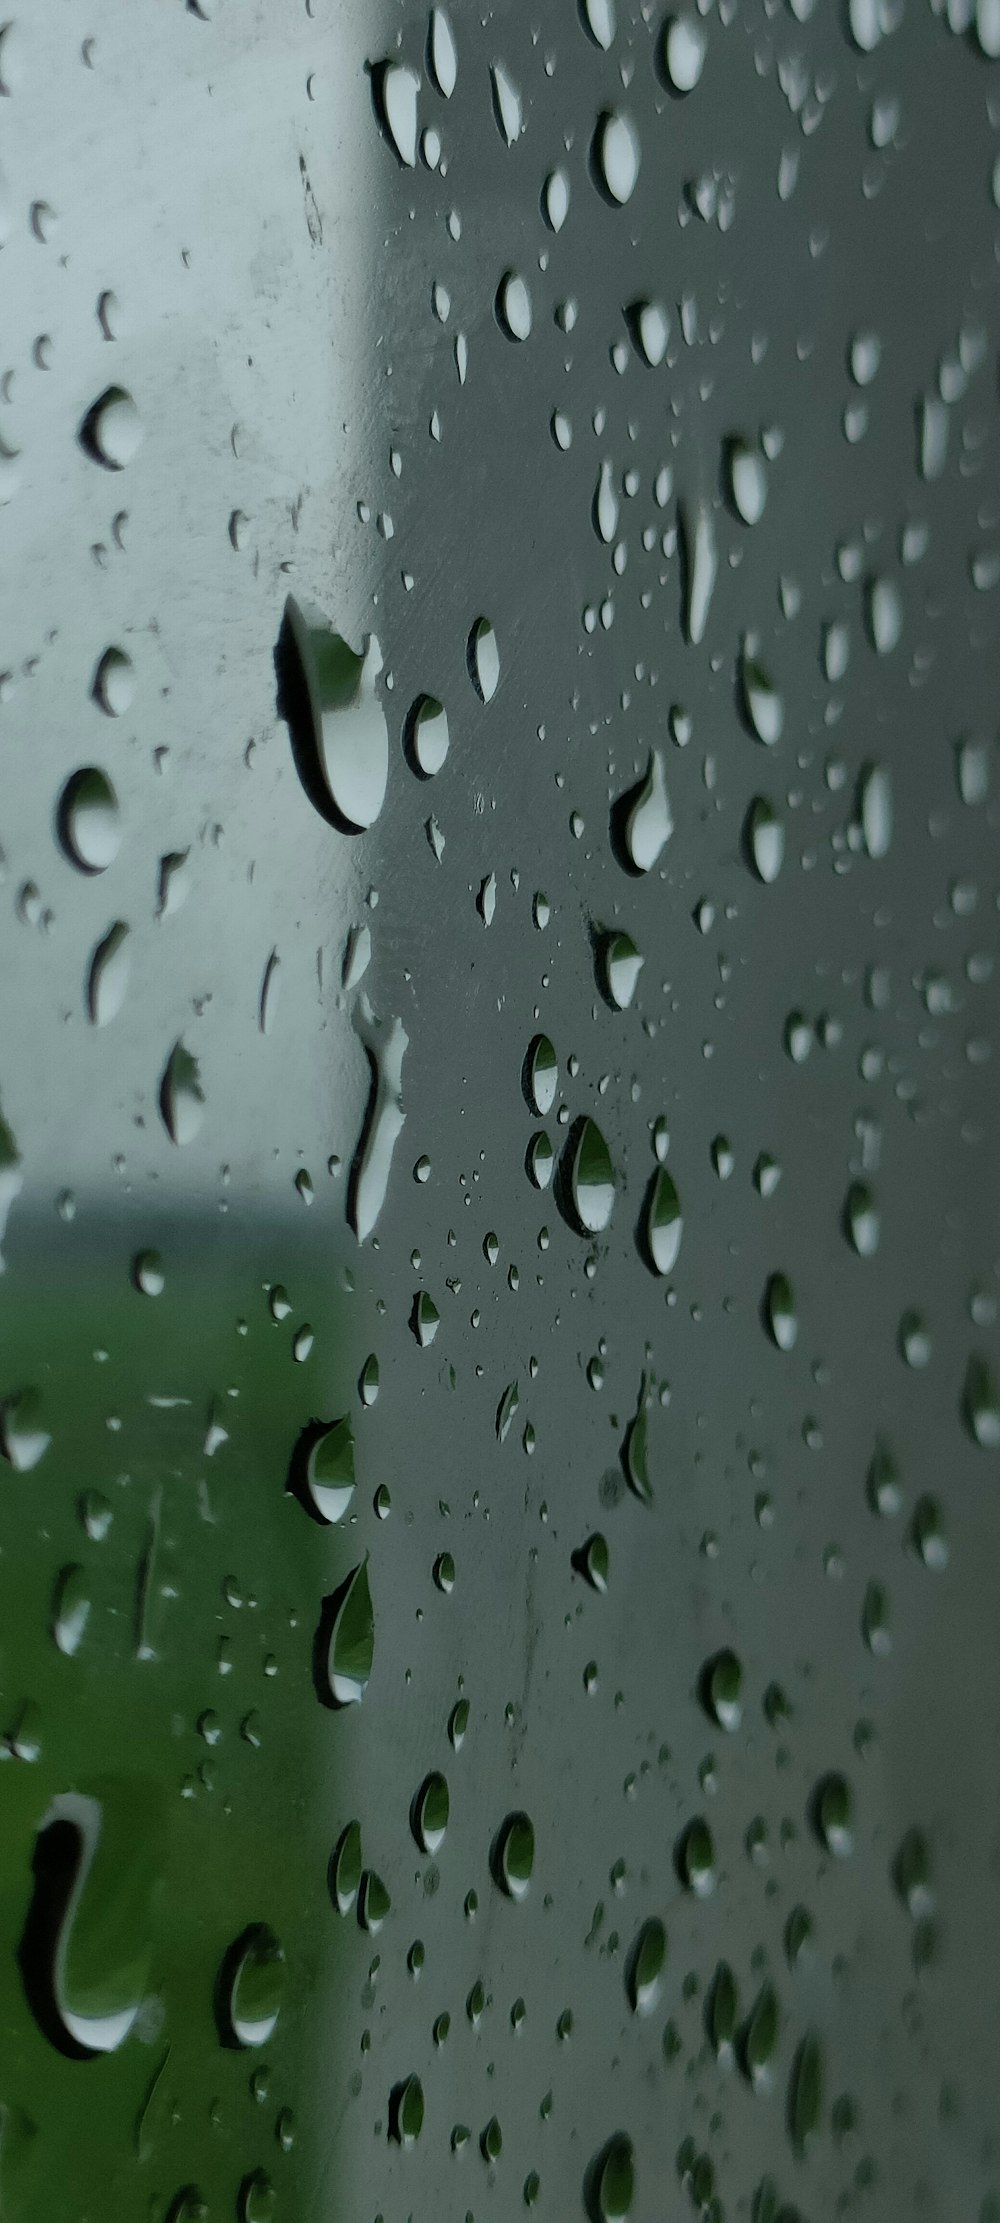 rain drops on a window with a green field in the background